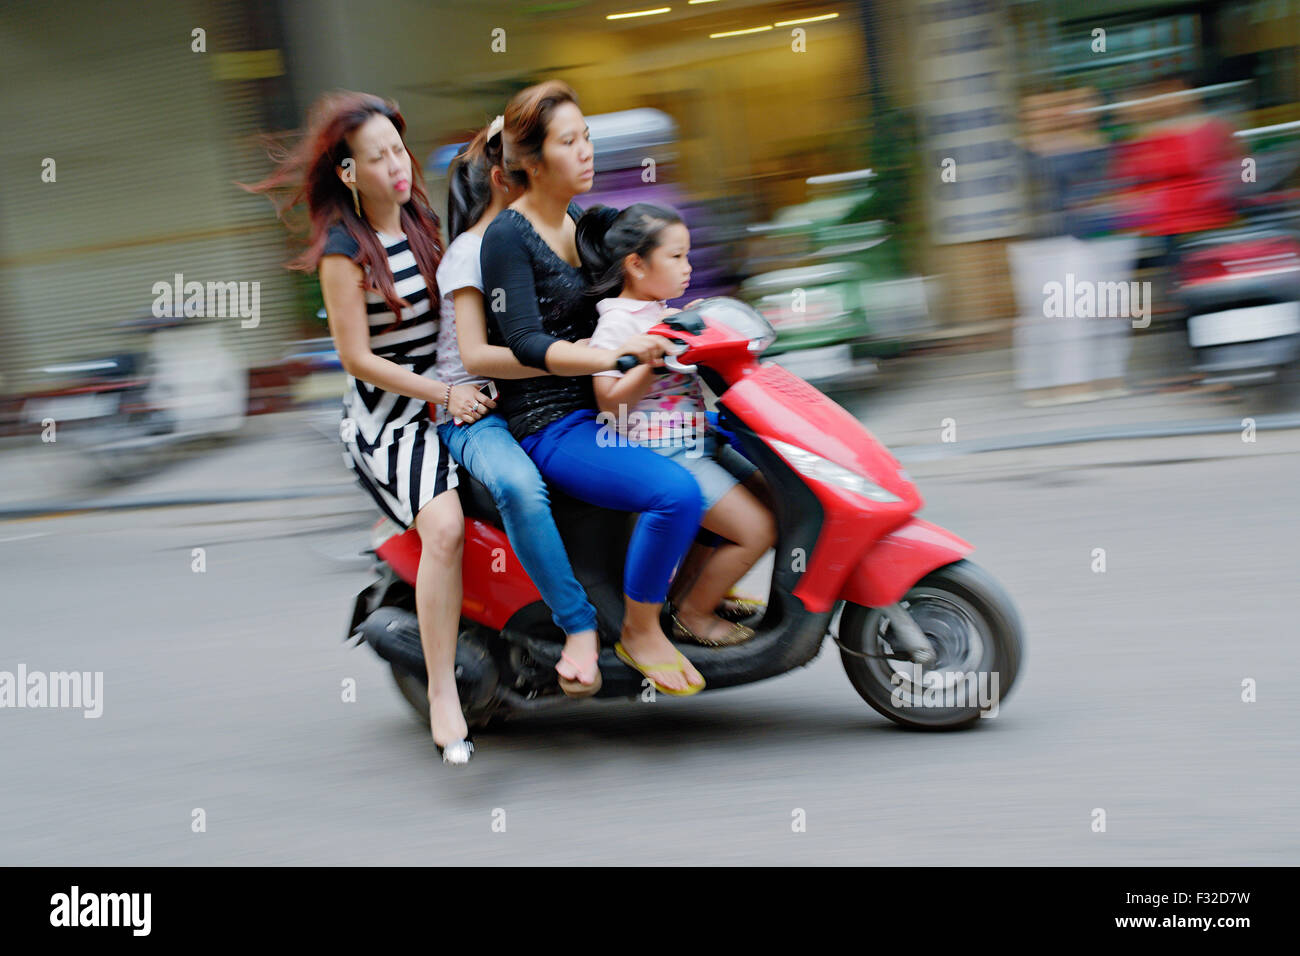 Mopeds and motorbikes are everywhere in Hanoi, Vietnam. It's not rare to see a whole family riding on only one scooter. Stock Photo